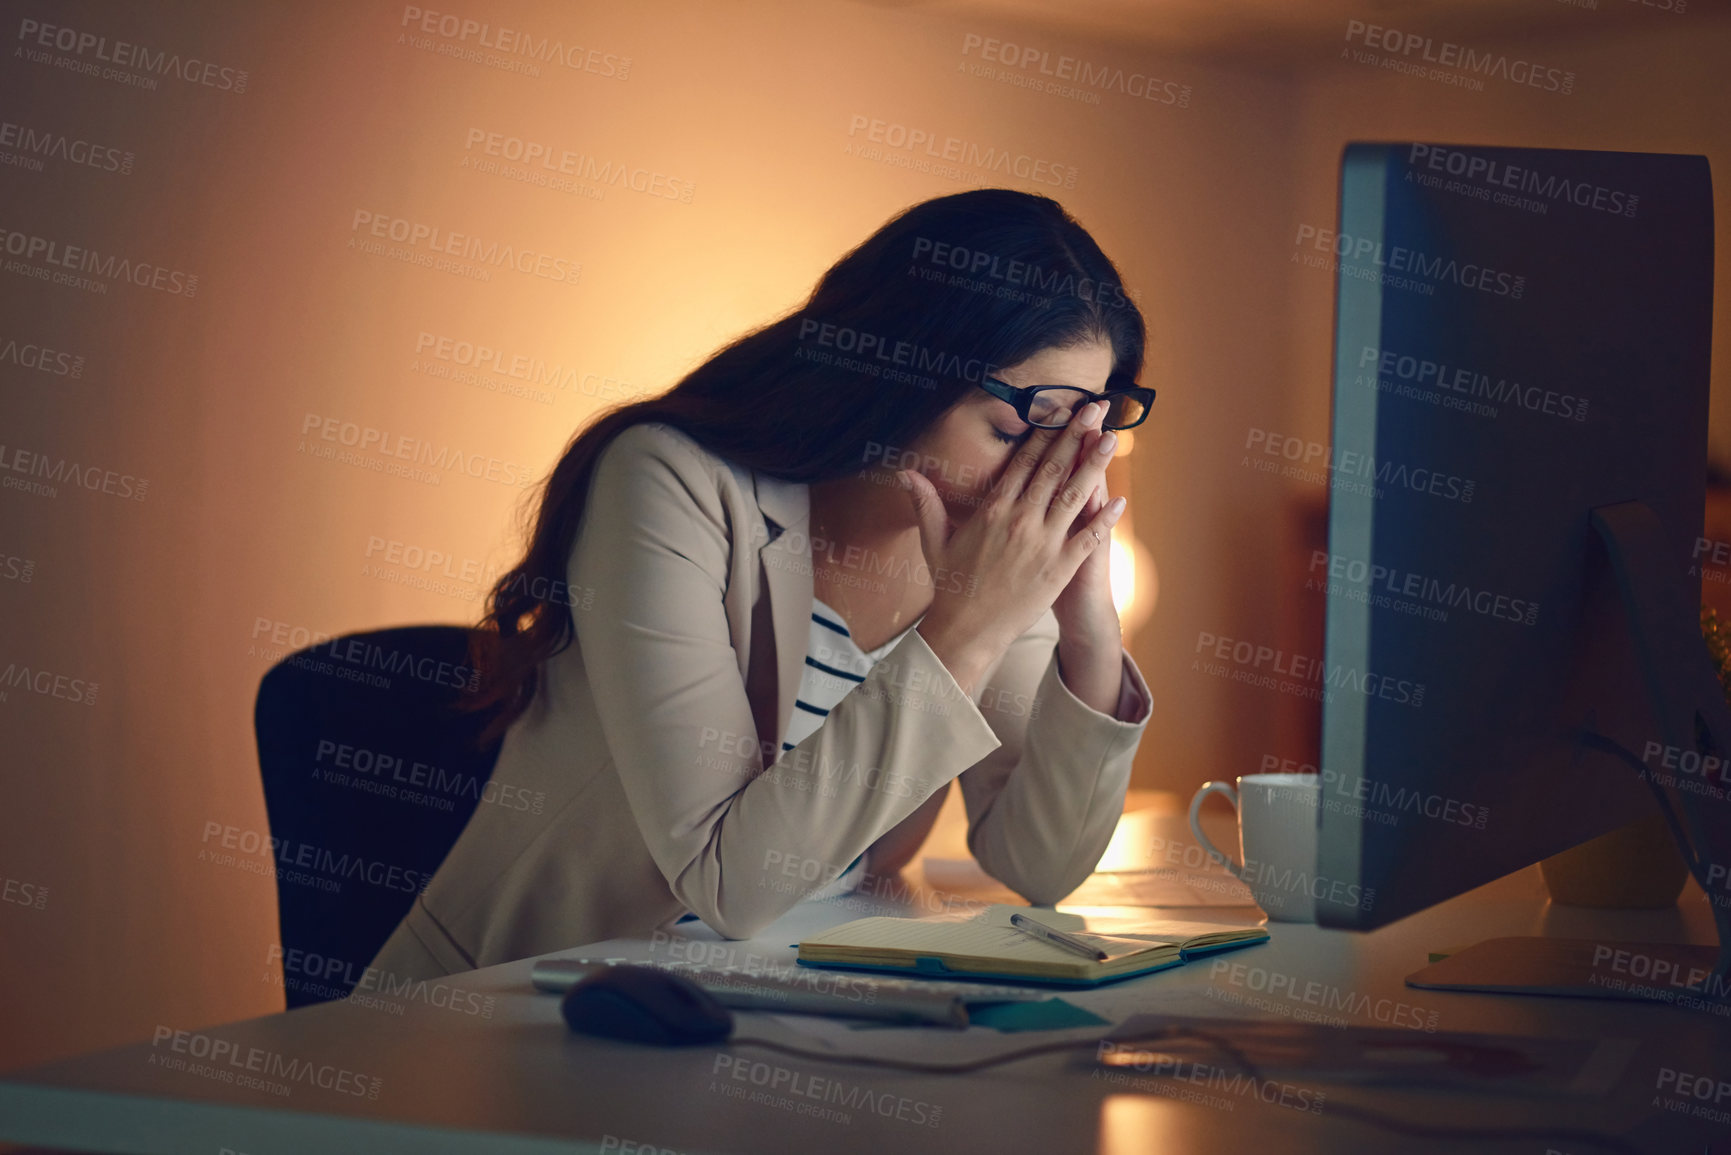 Buy stock photo Shot of a young businesswoman experiencing strain during a late night at work